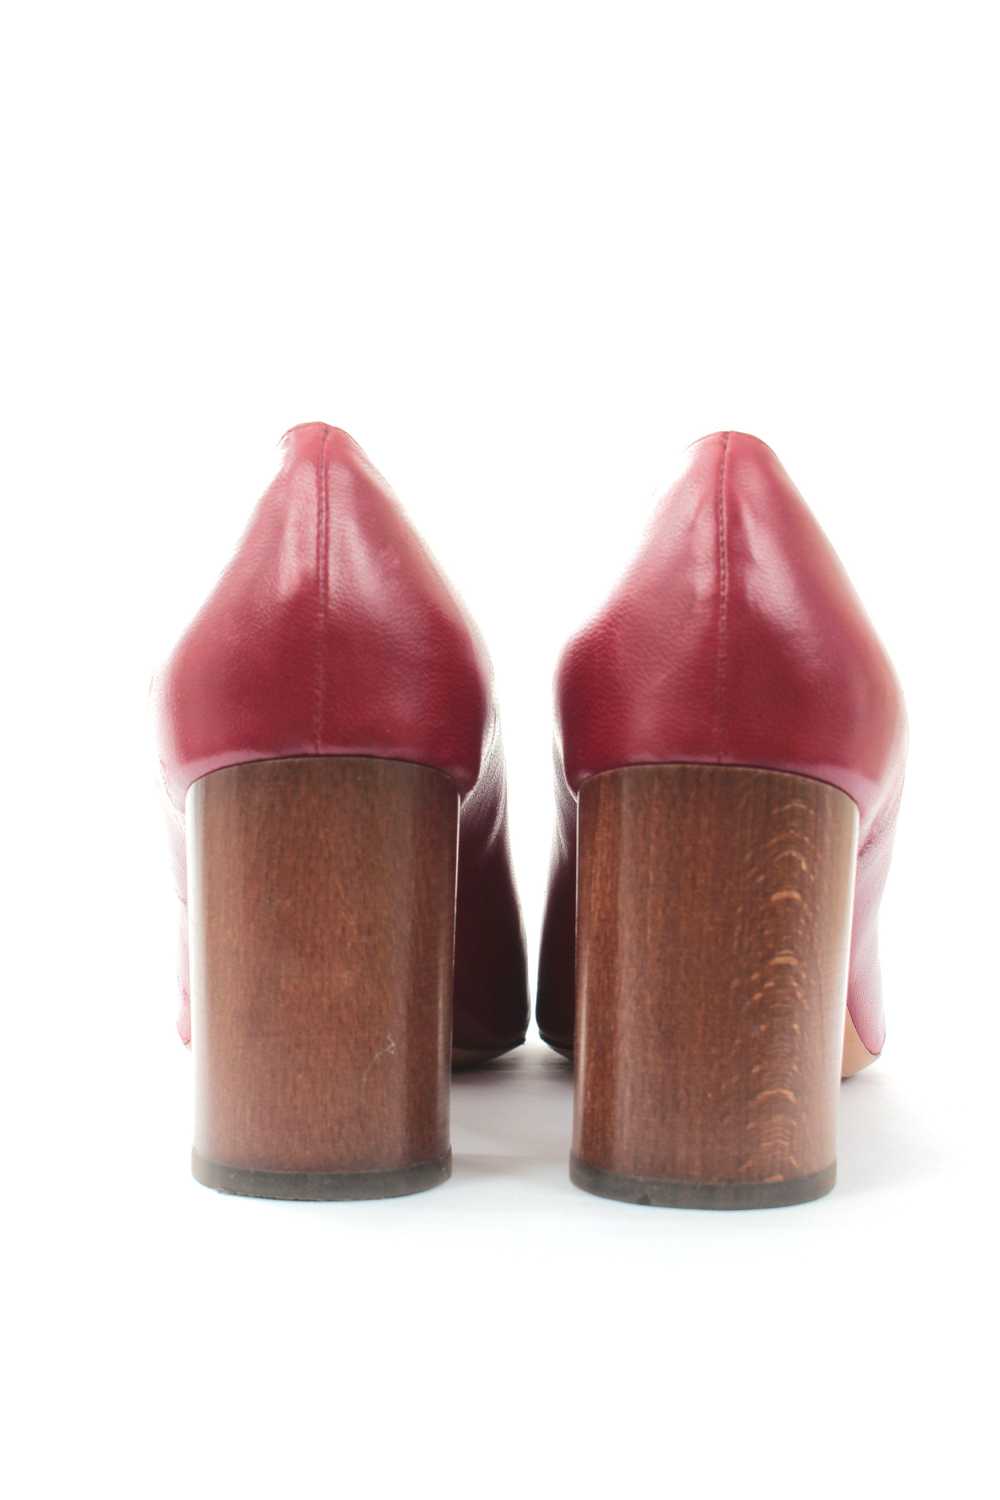 Chloe Red leather wooden block heeled pumps - image 3